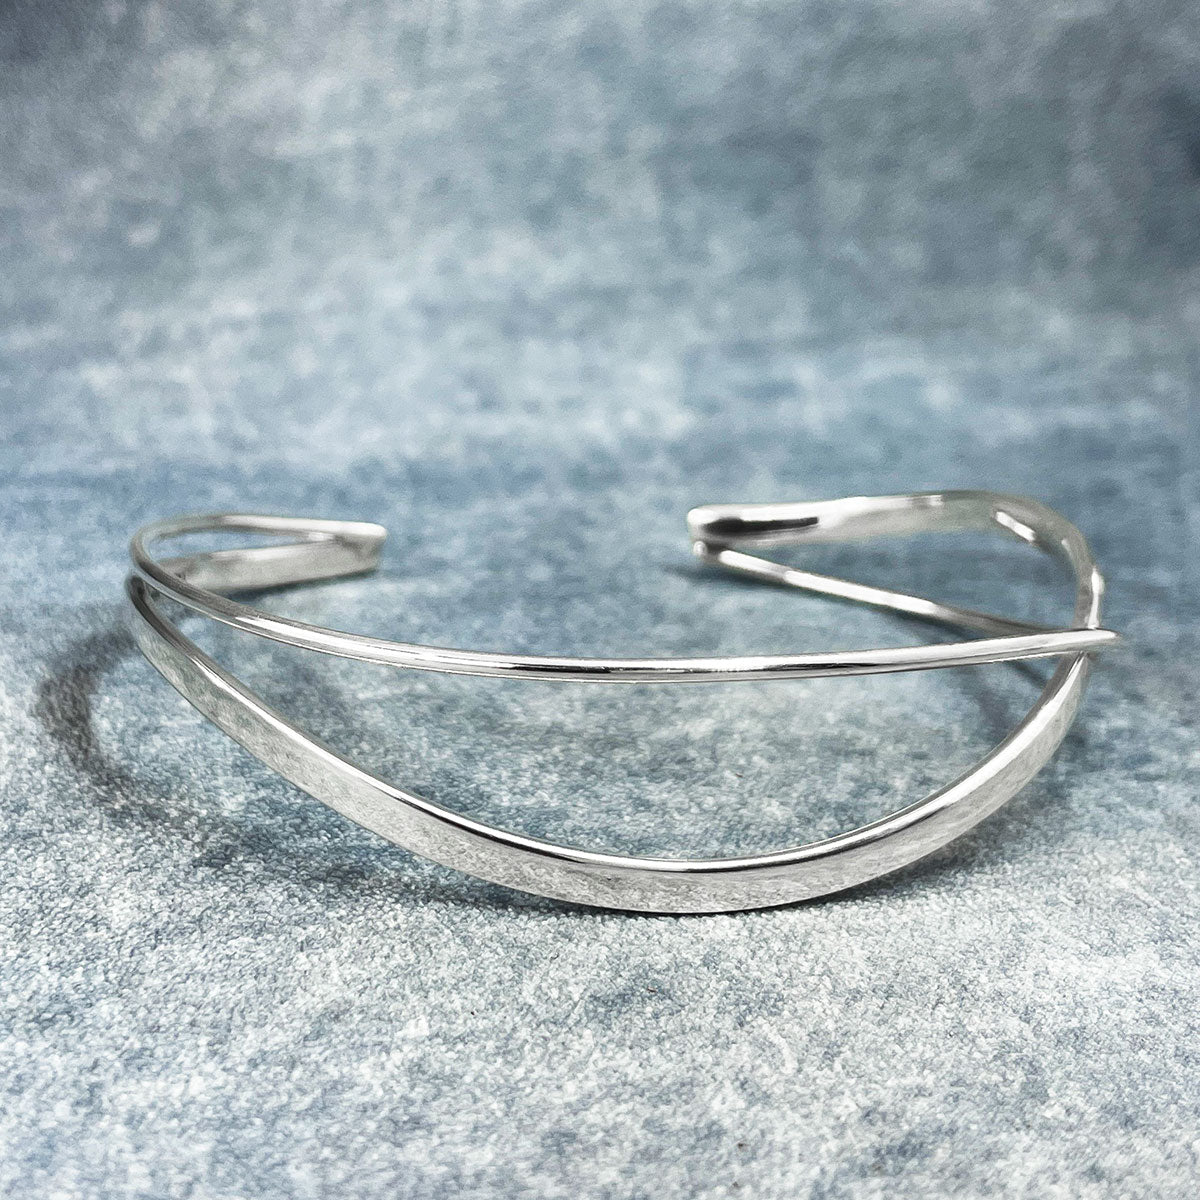 Uisce - Double Wave Cuff Silver Bracelet Curated and designed by Emilio Sotelo Jewelry for Croi Kinsale Jewellery in Kinsale West Cork Ireland Europe. Find exceptional handmade silver and gold jewellery at affordable prices for birthday gifts and Christmas presents. Handcrafted Silver jewelry. Find the best affordable jewellery